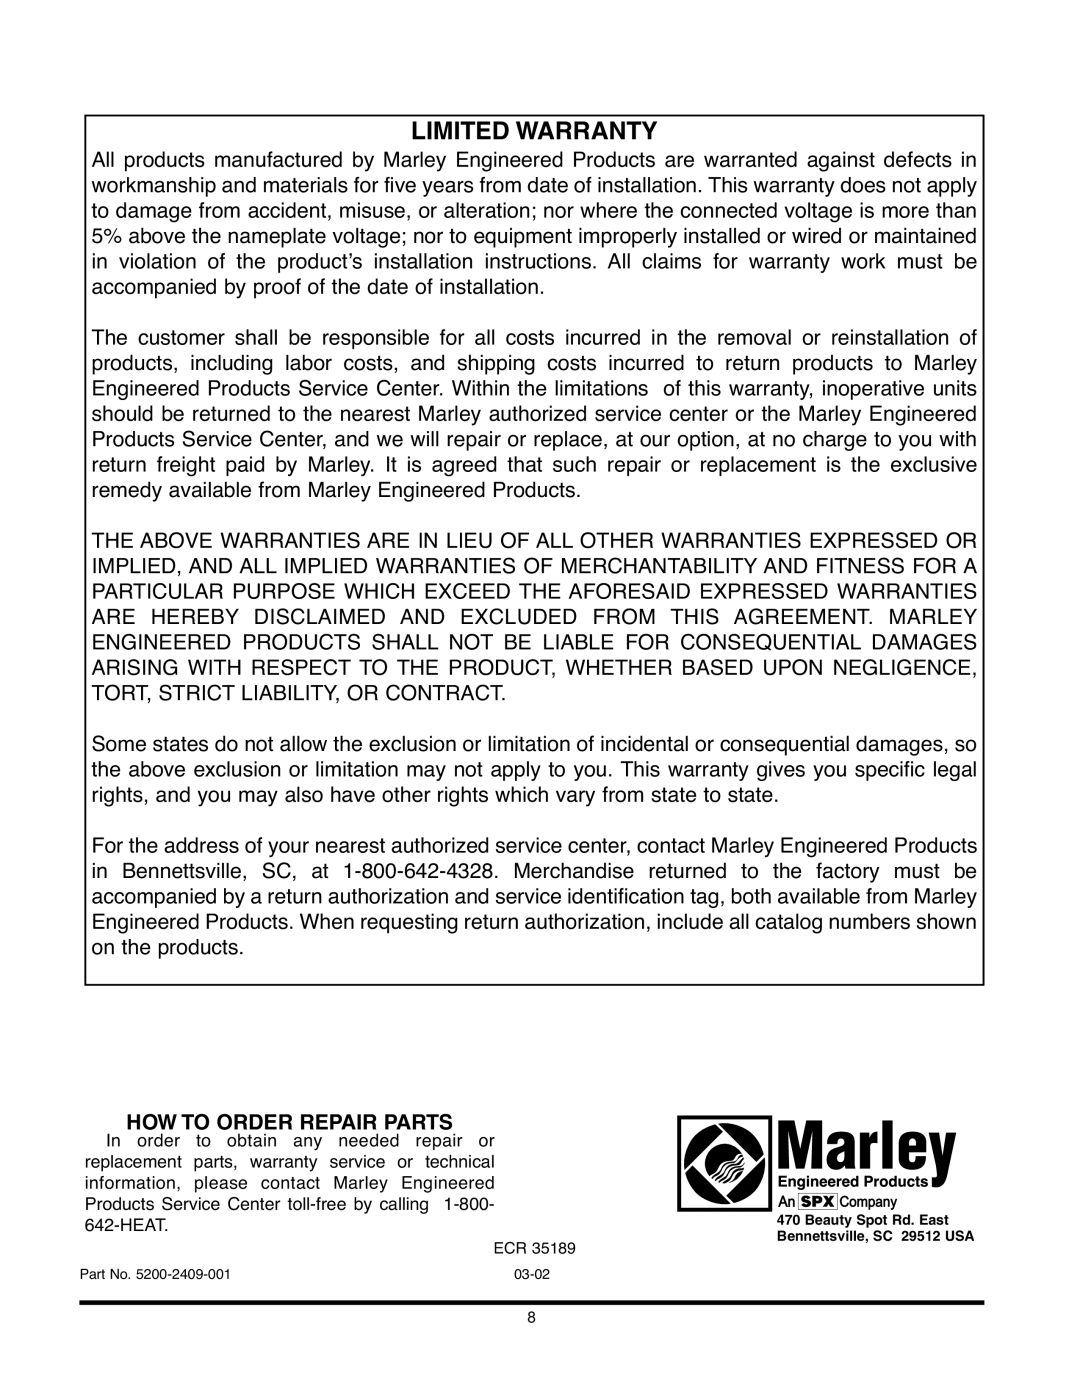 Marley Engineered Products Environmental Series, 5200-2409-001 specifications How To Order Repair Parts, Limited Warranty 